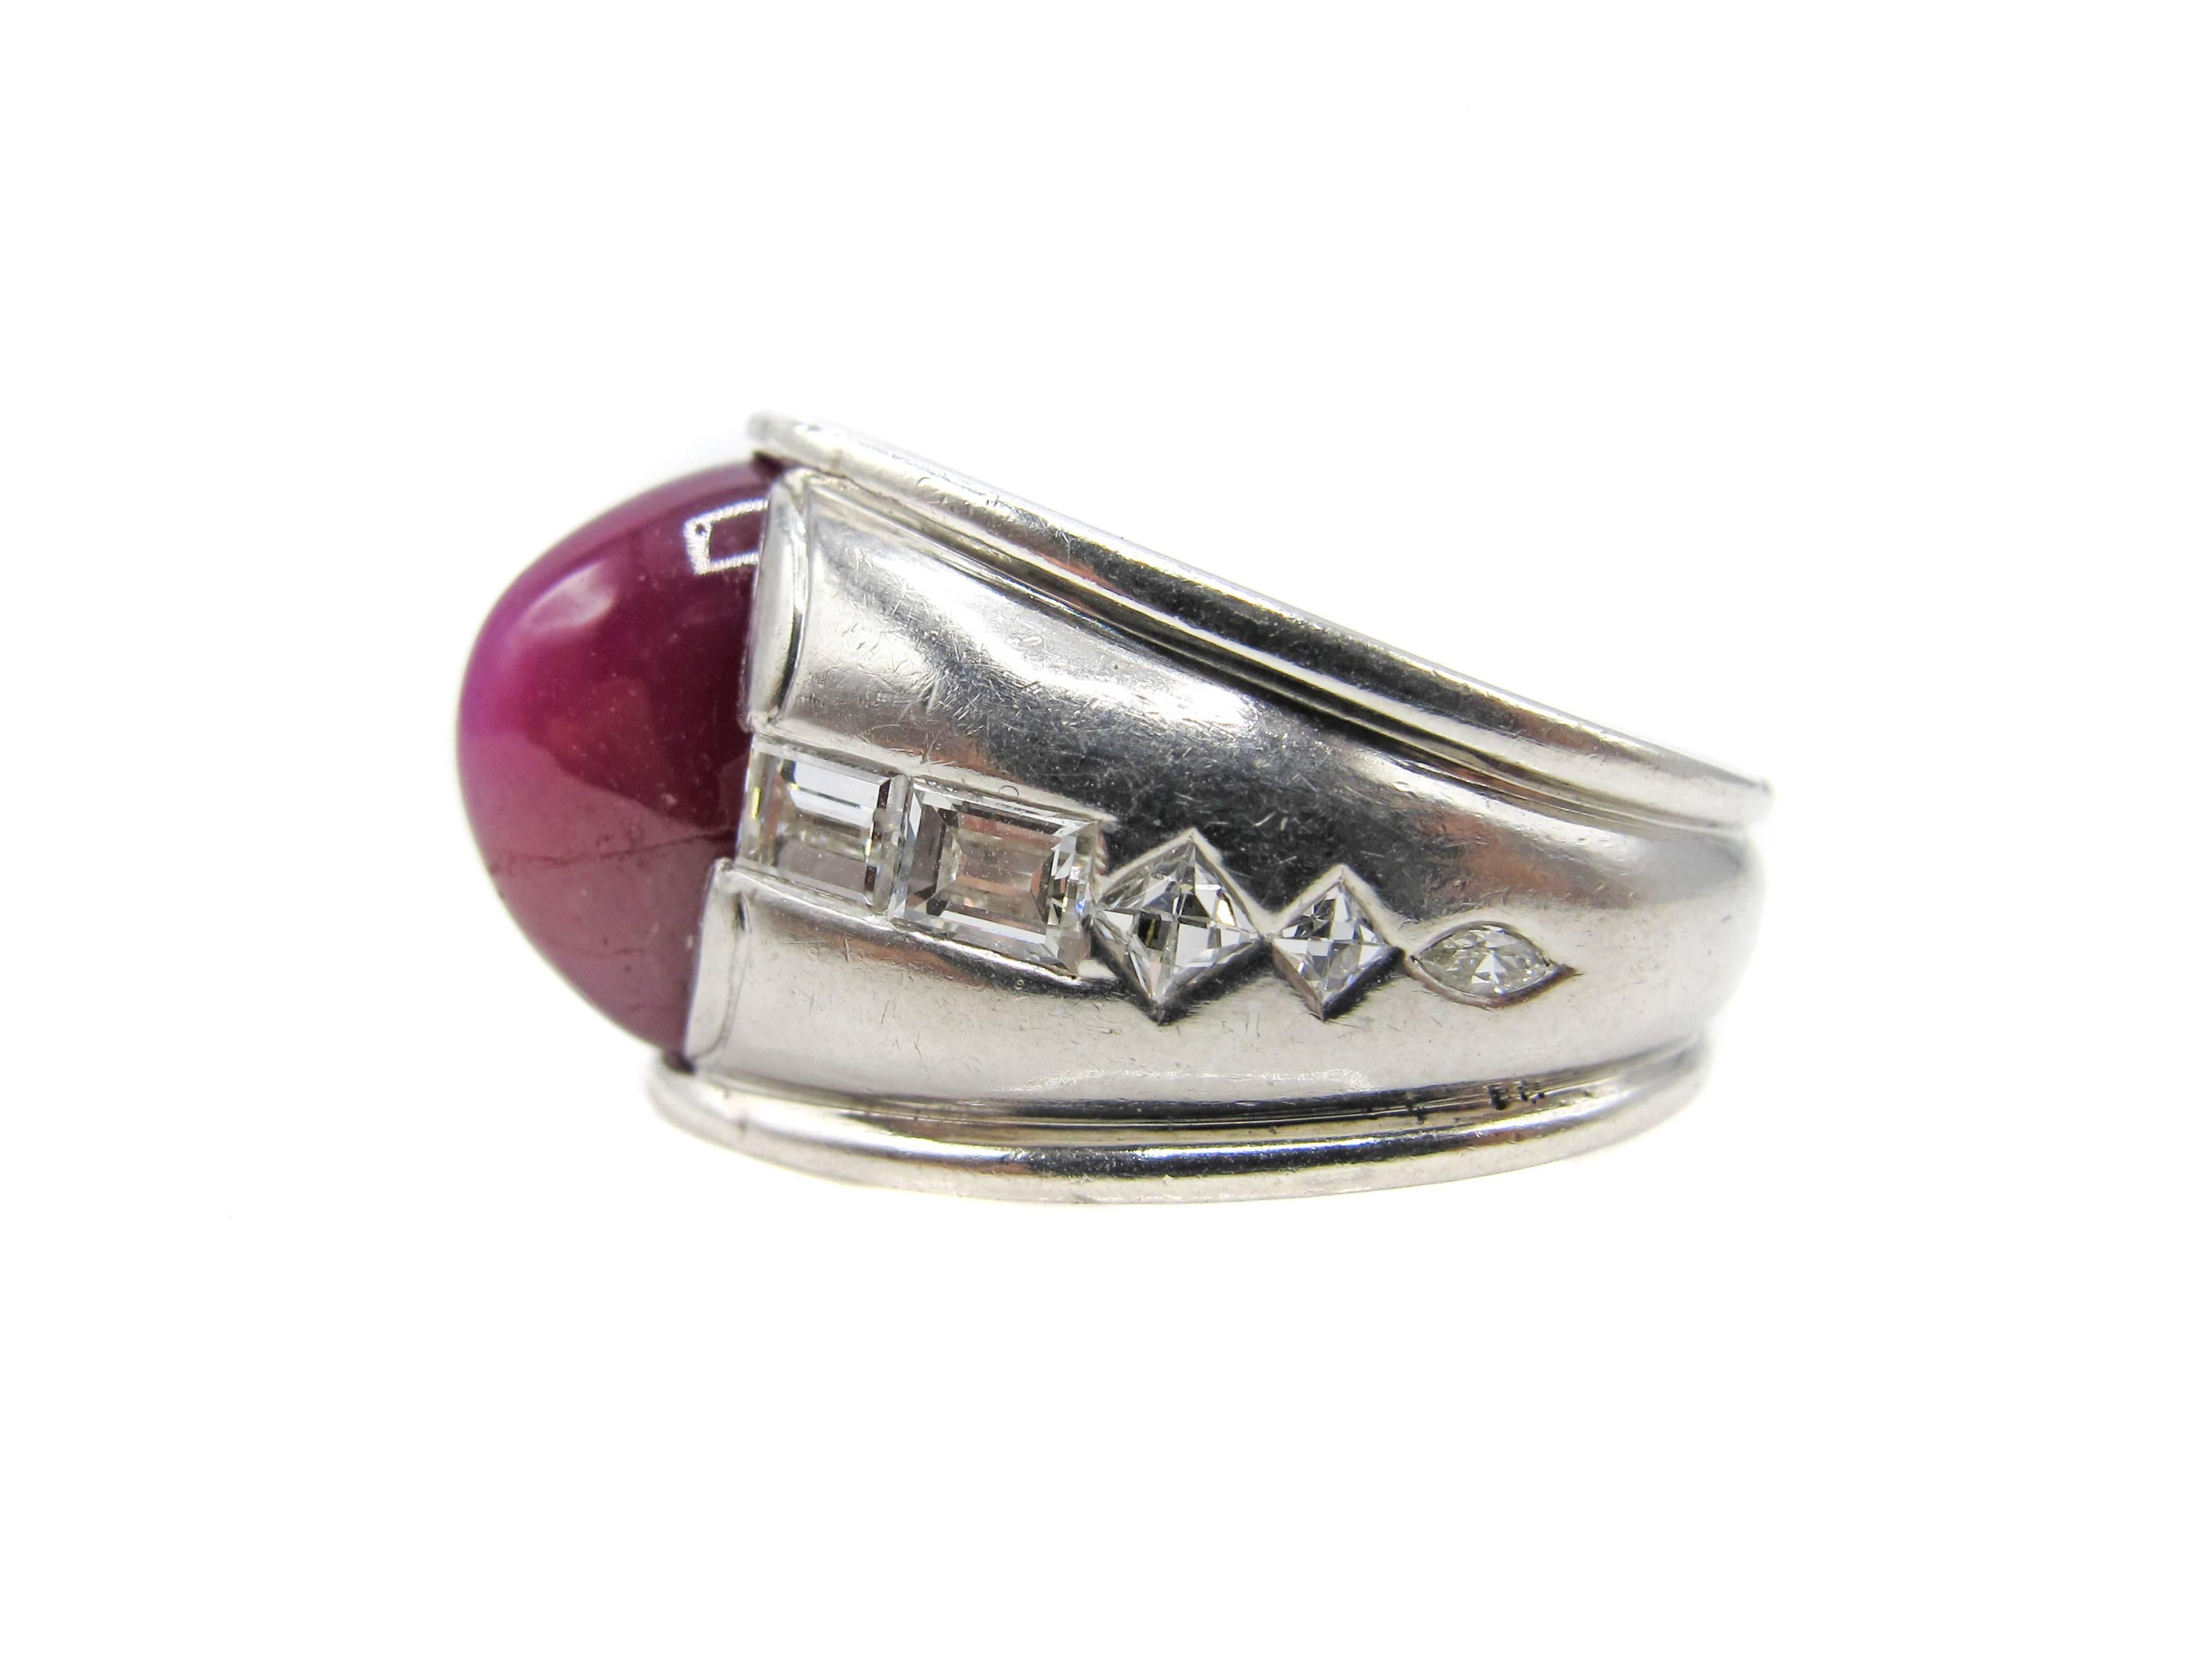 
This spectacular Burma  sugar loaf cabochon star ruby ring is set in a finely hand crafted platinum mounting. The ruby measures 12.24 mm x 8.83 mm x 8.78 mm and is estimated to weigh approximately 11 carats. Burma Star Rubies are extremely rare and